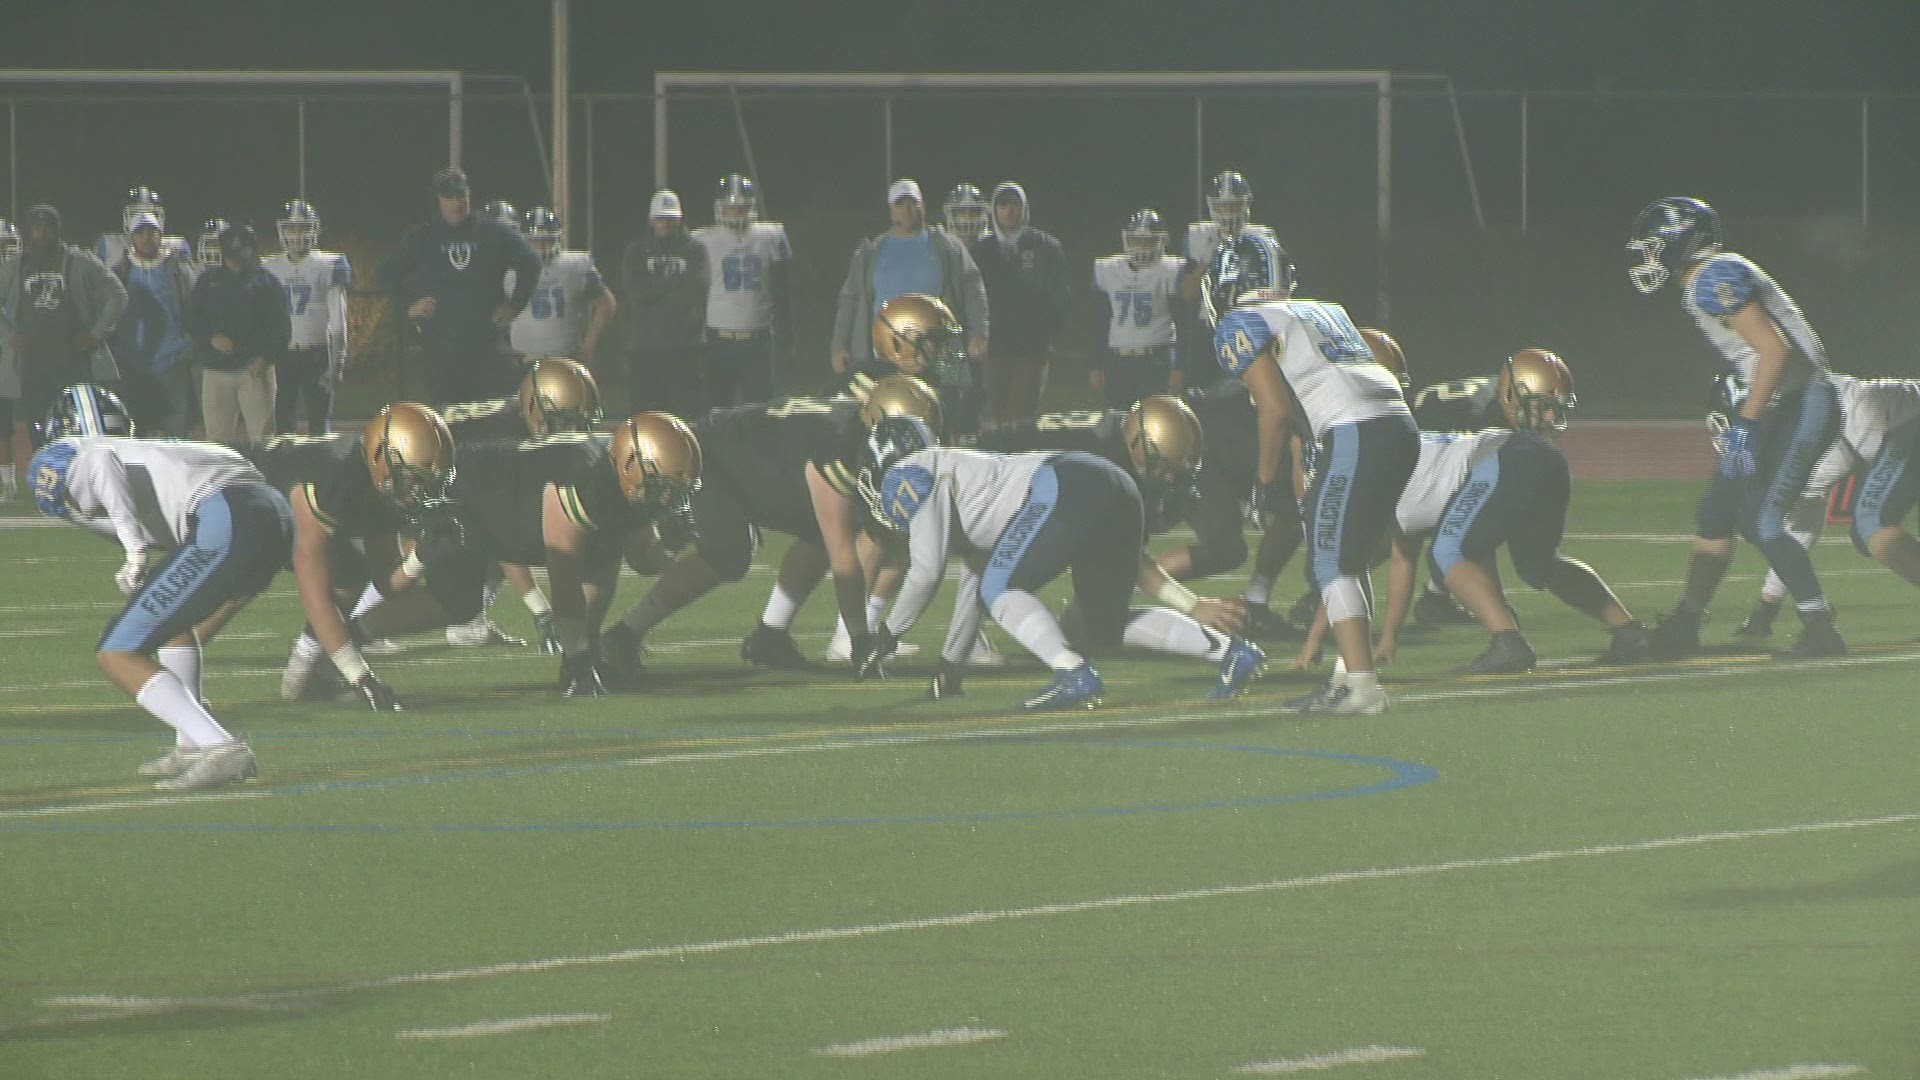 Highlights of Jesuit's 70-24 win over Liberty in the second round of the playoffs. Highlights are part of Friday Night Flights with Orlando Sanchez.